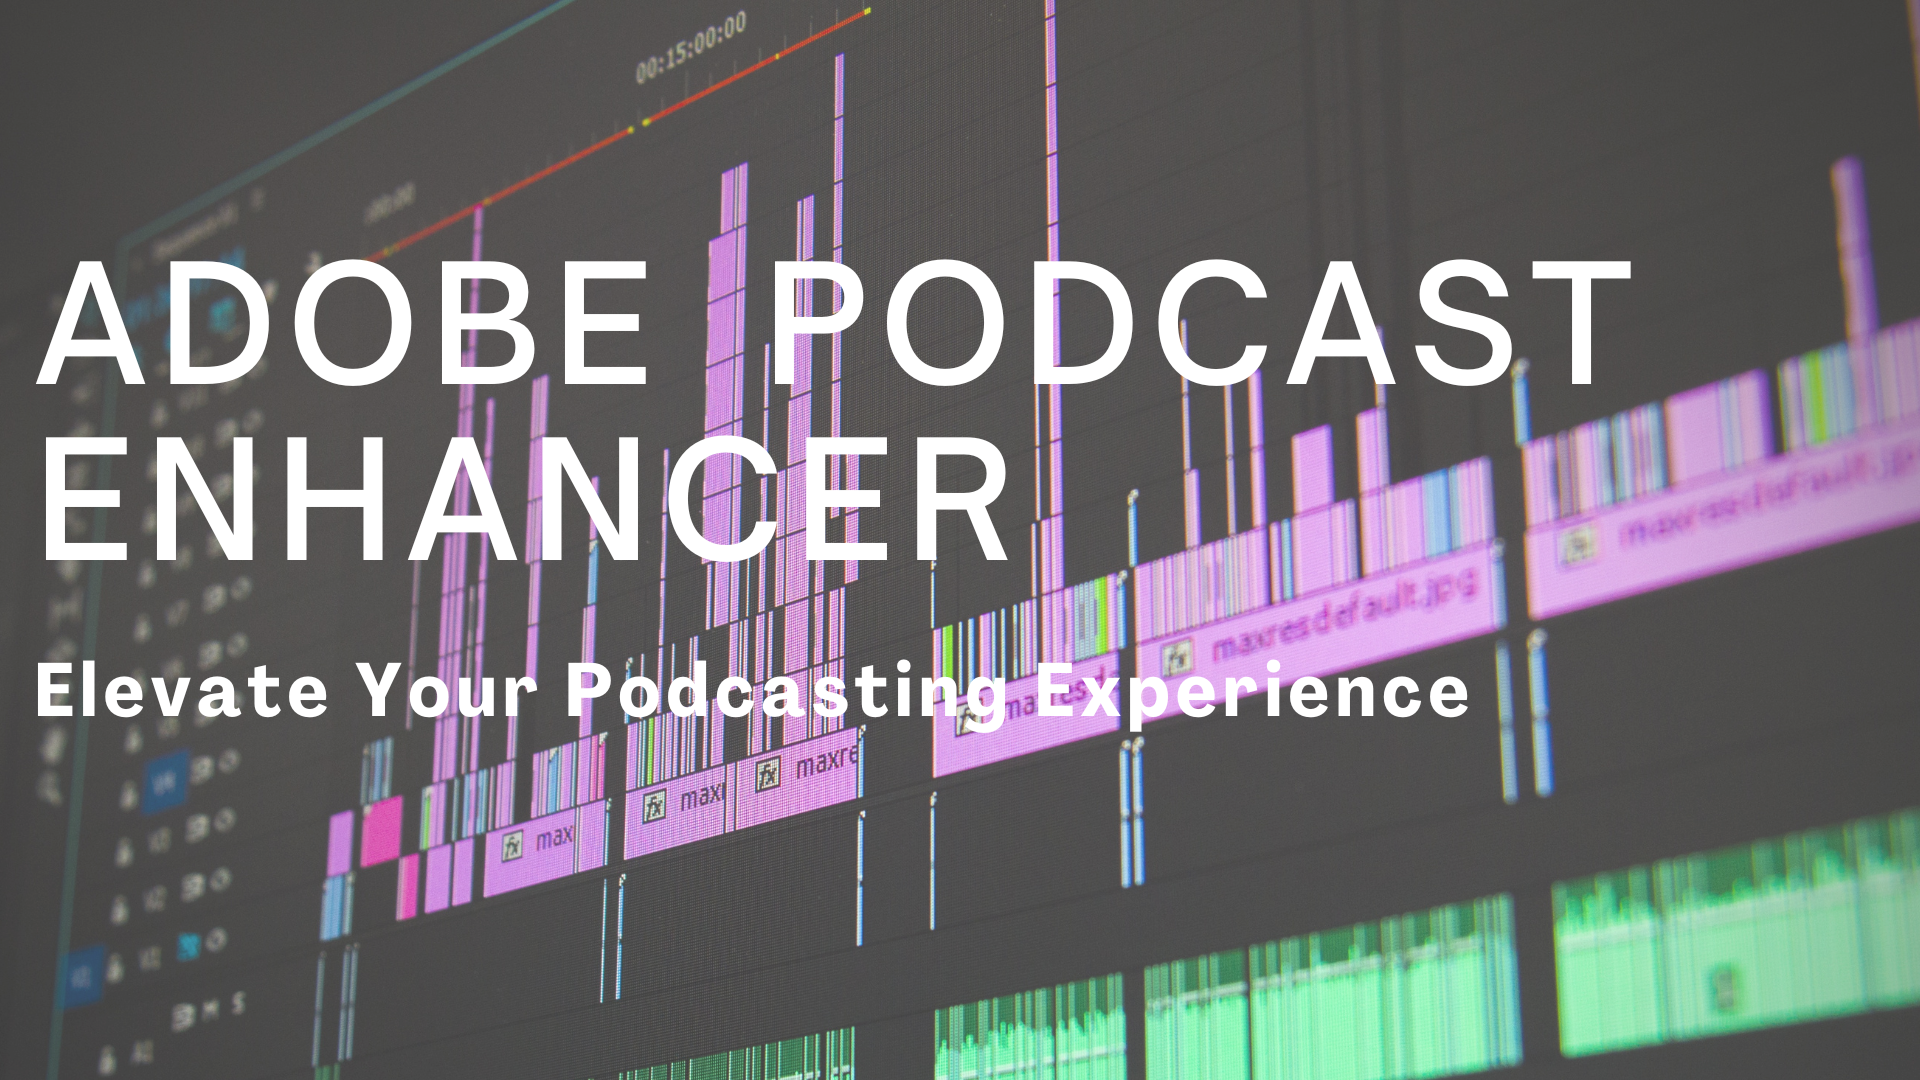 Cover Image for How to elevate your podcasting experience with Adobe Podcast Enhance?